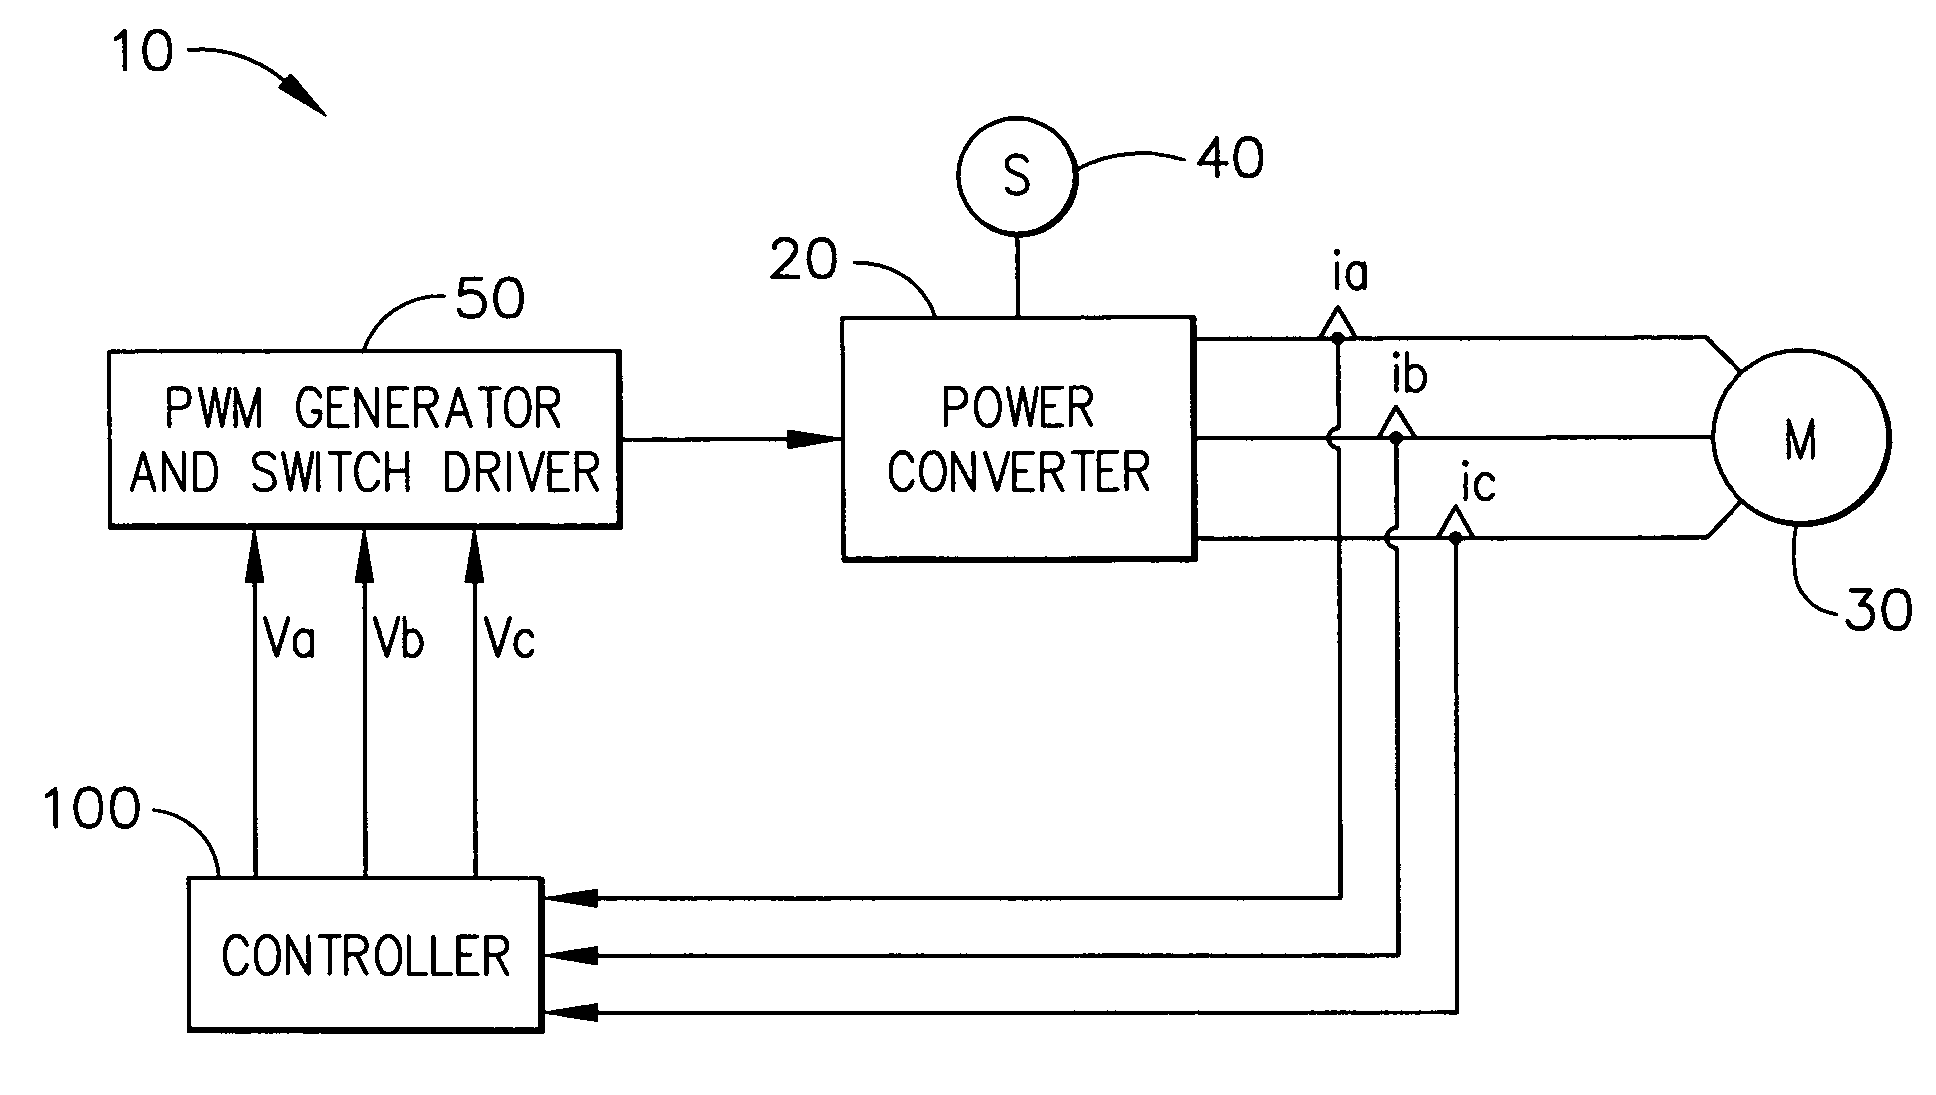 Instantaneous power floating frame controller